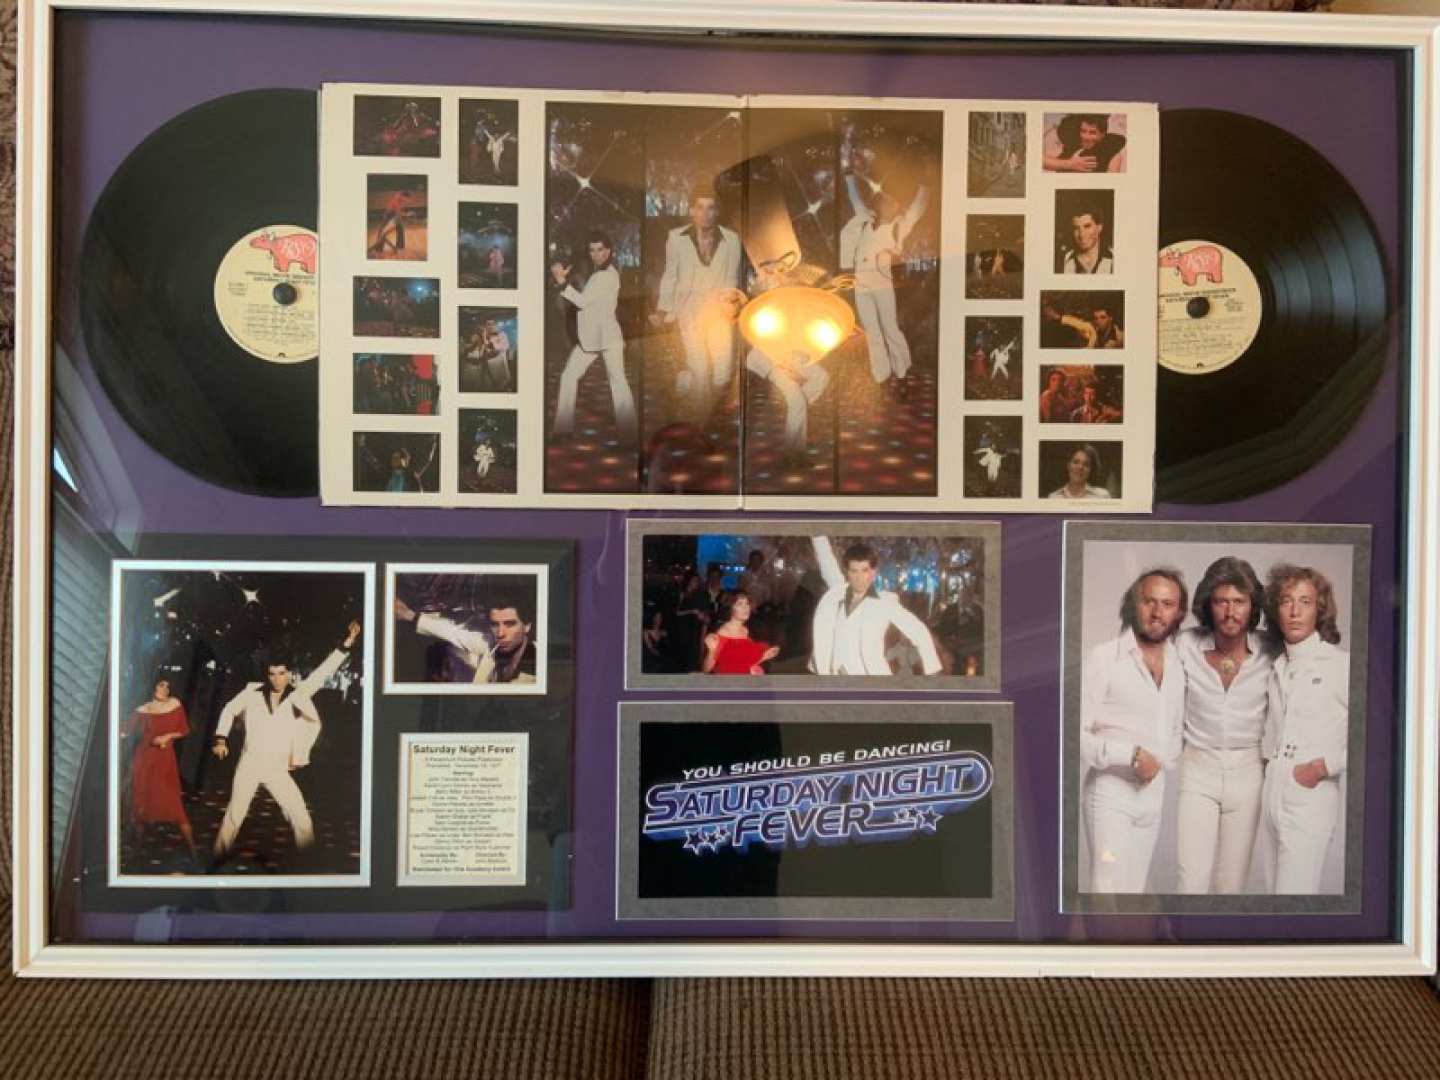 0th Image of a N/A SATURDAY NIGHT FEVER FRAMED MONTAGE